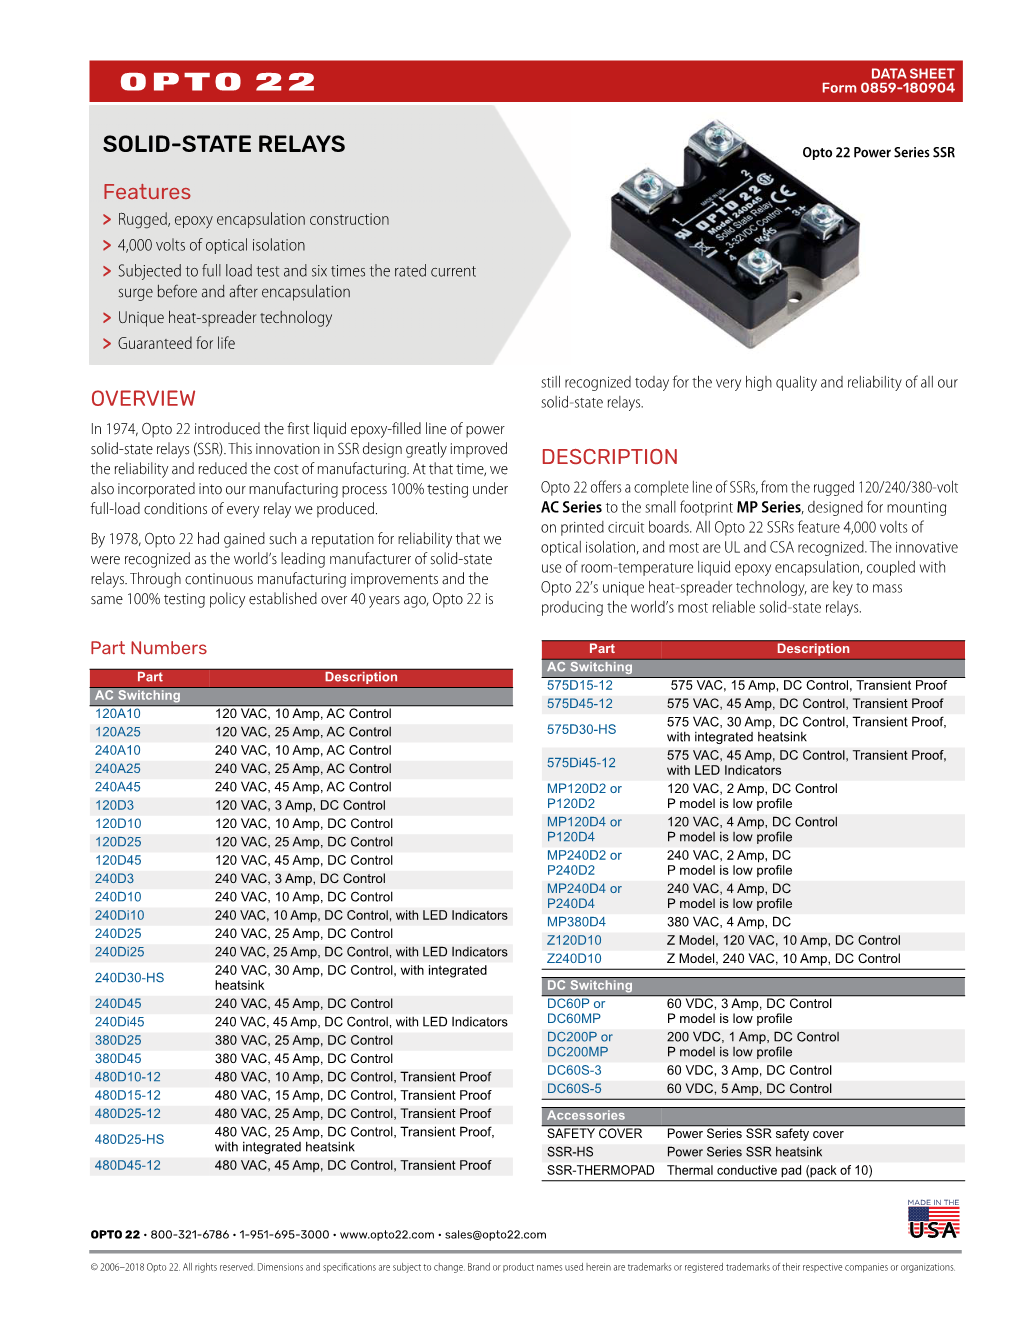 Solid-State Relays Data Sheet